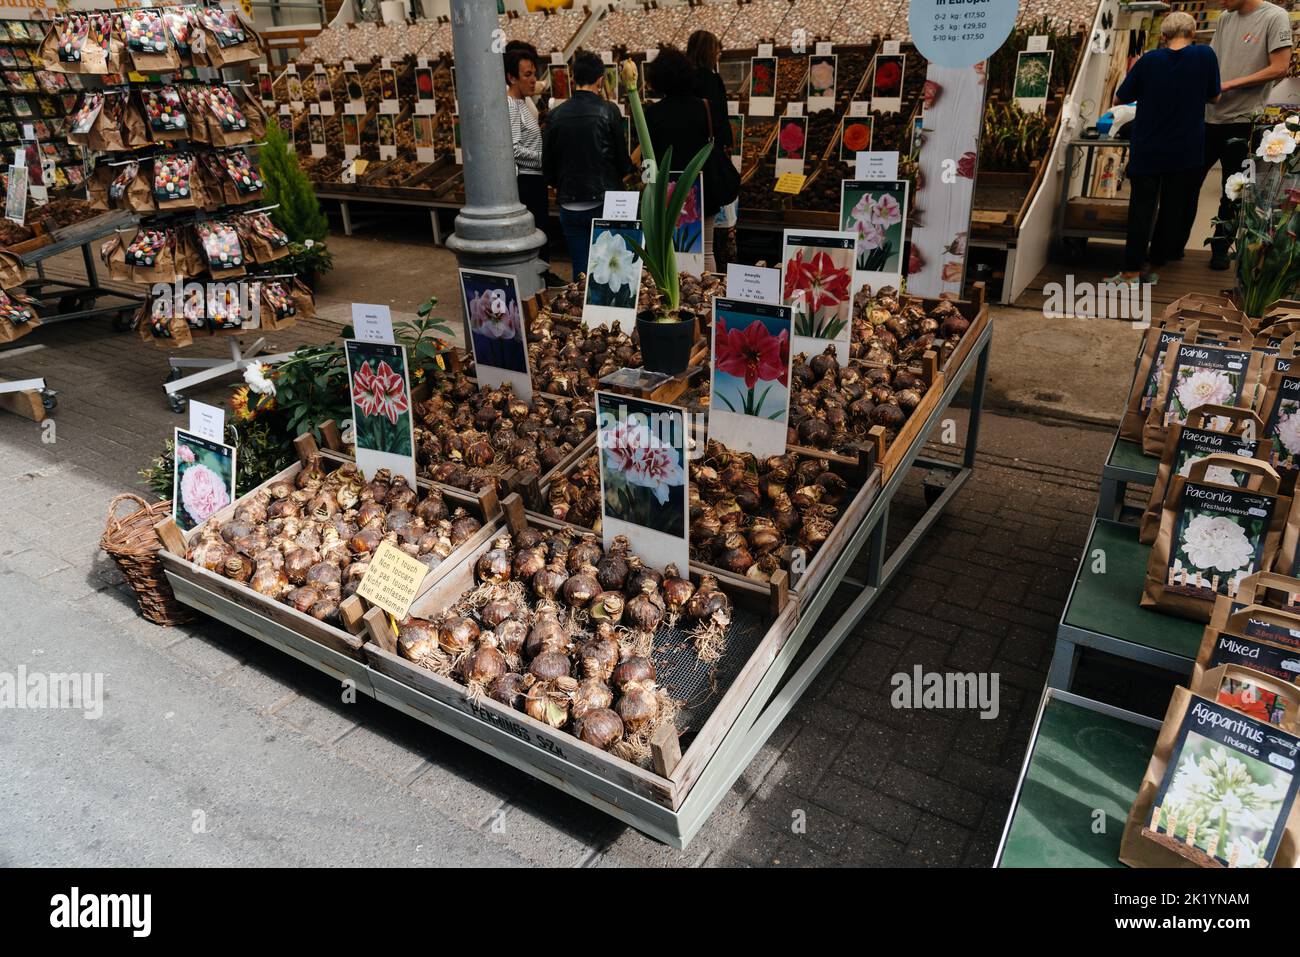 Amsterdam, Netherlands - May 7, 2022: The Flower market at the Singel Canal Stock Photo